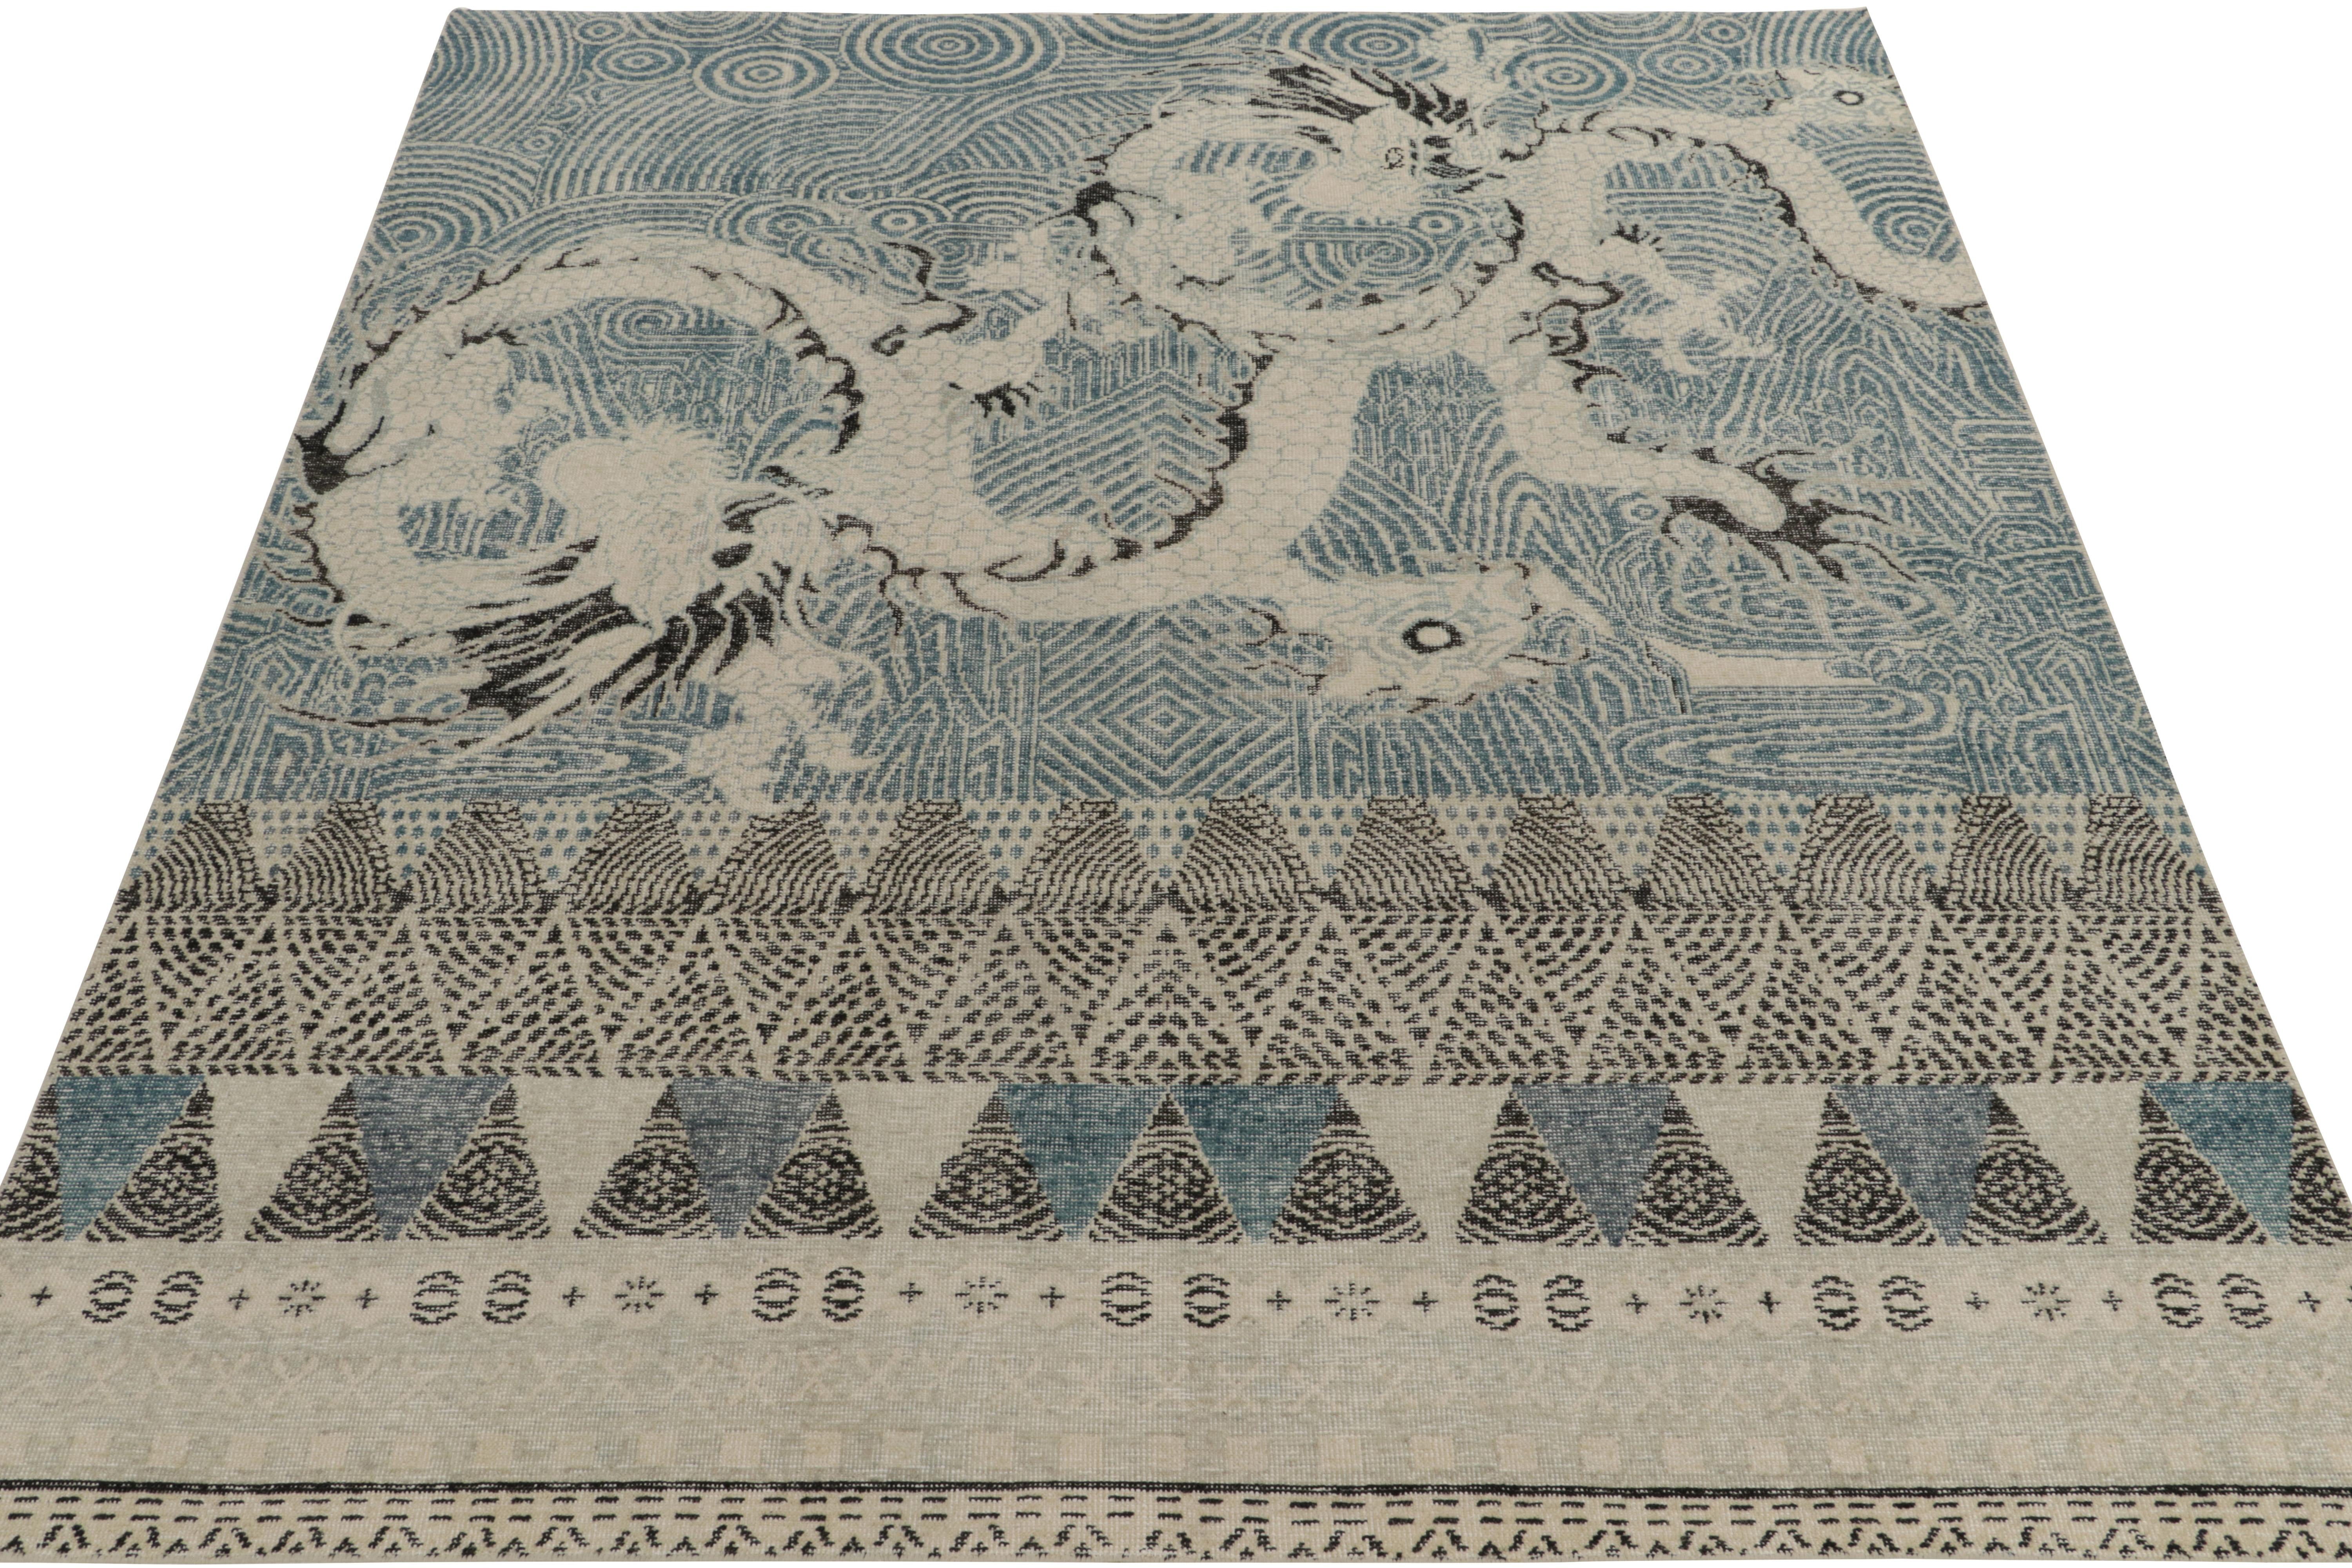 Indian Rug & Kilim's Distressed Style Dragon Rug in Blue, Gray & Black Pictorials For Sale